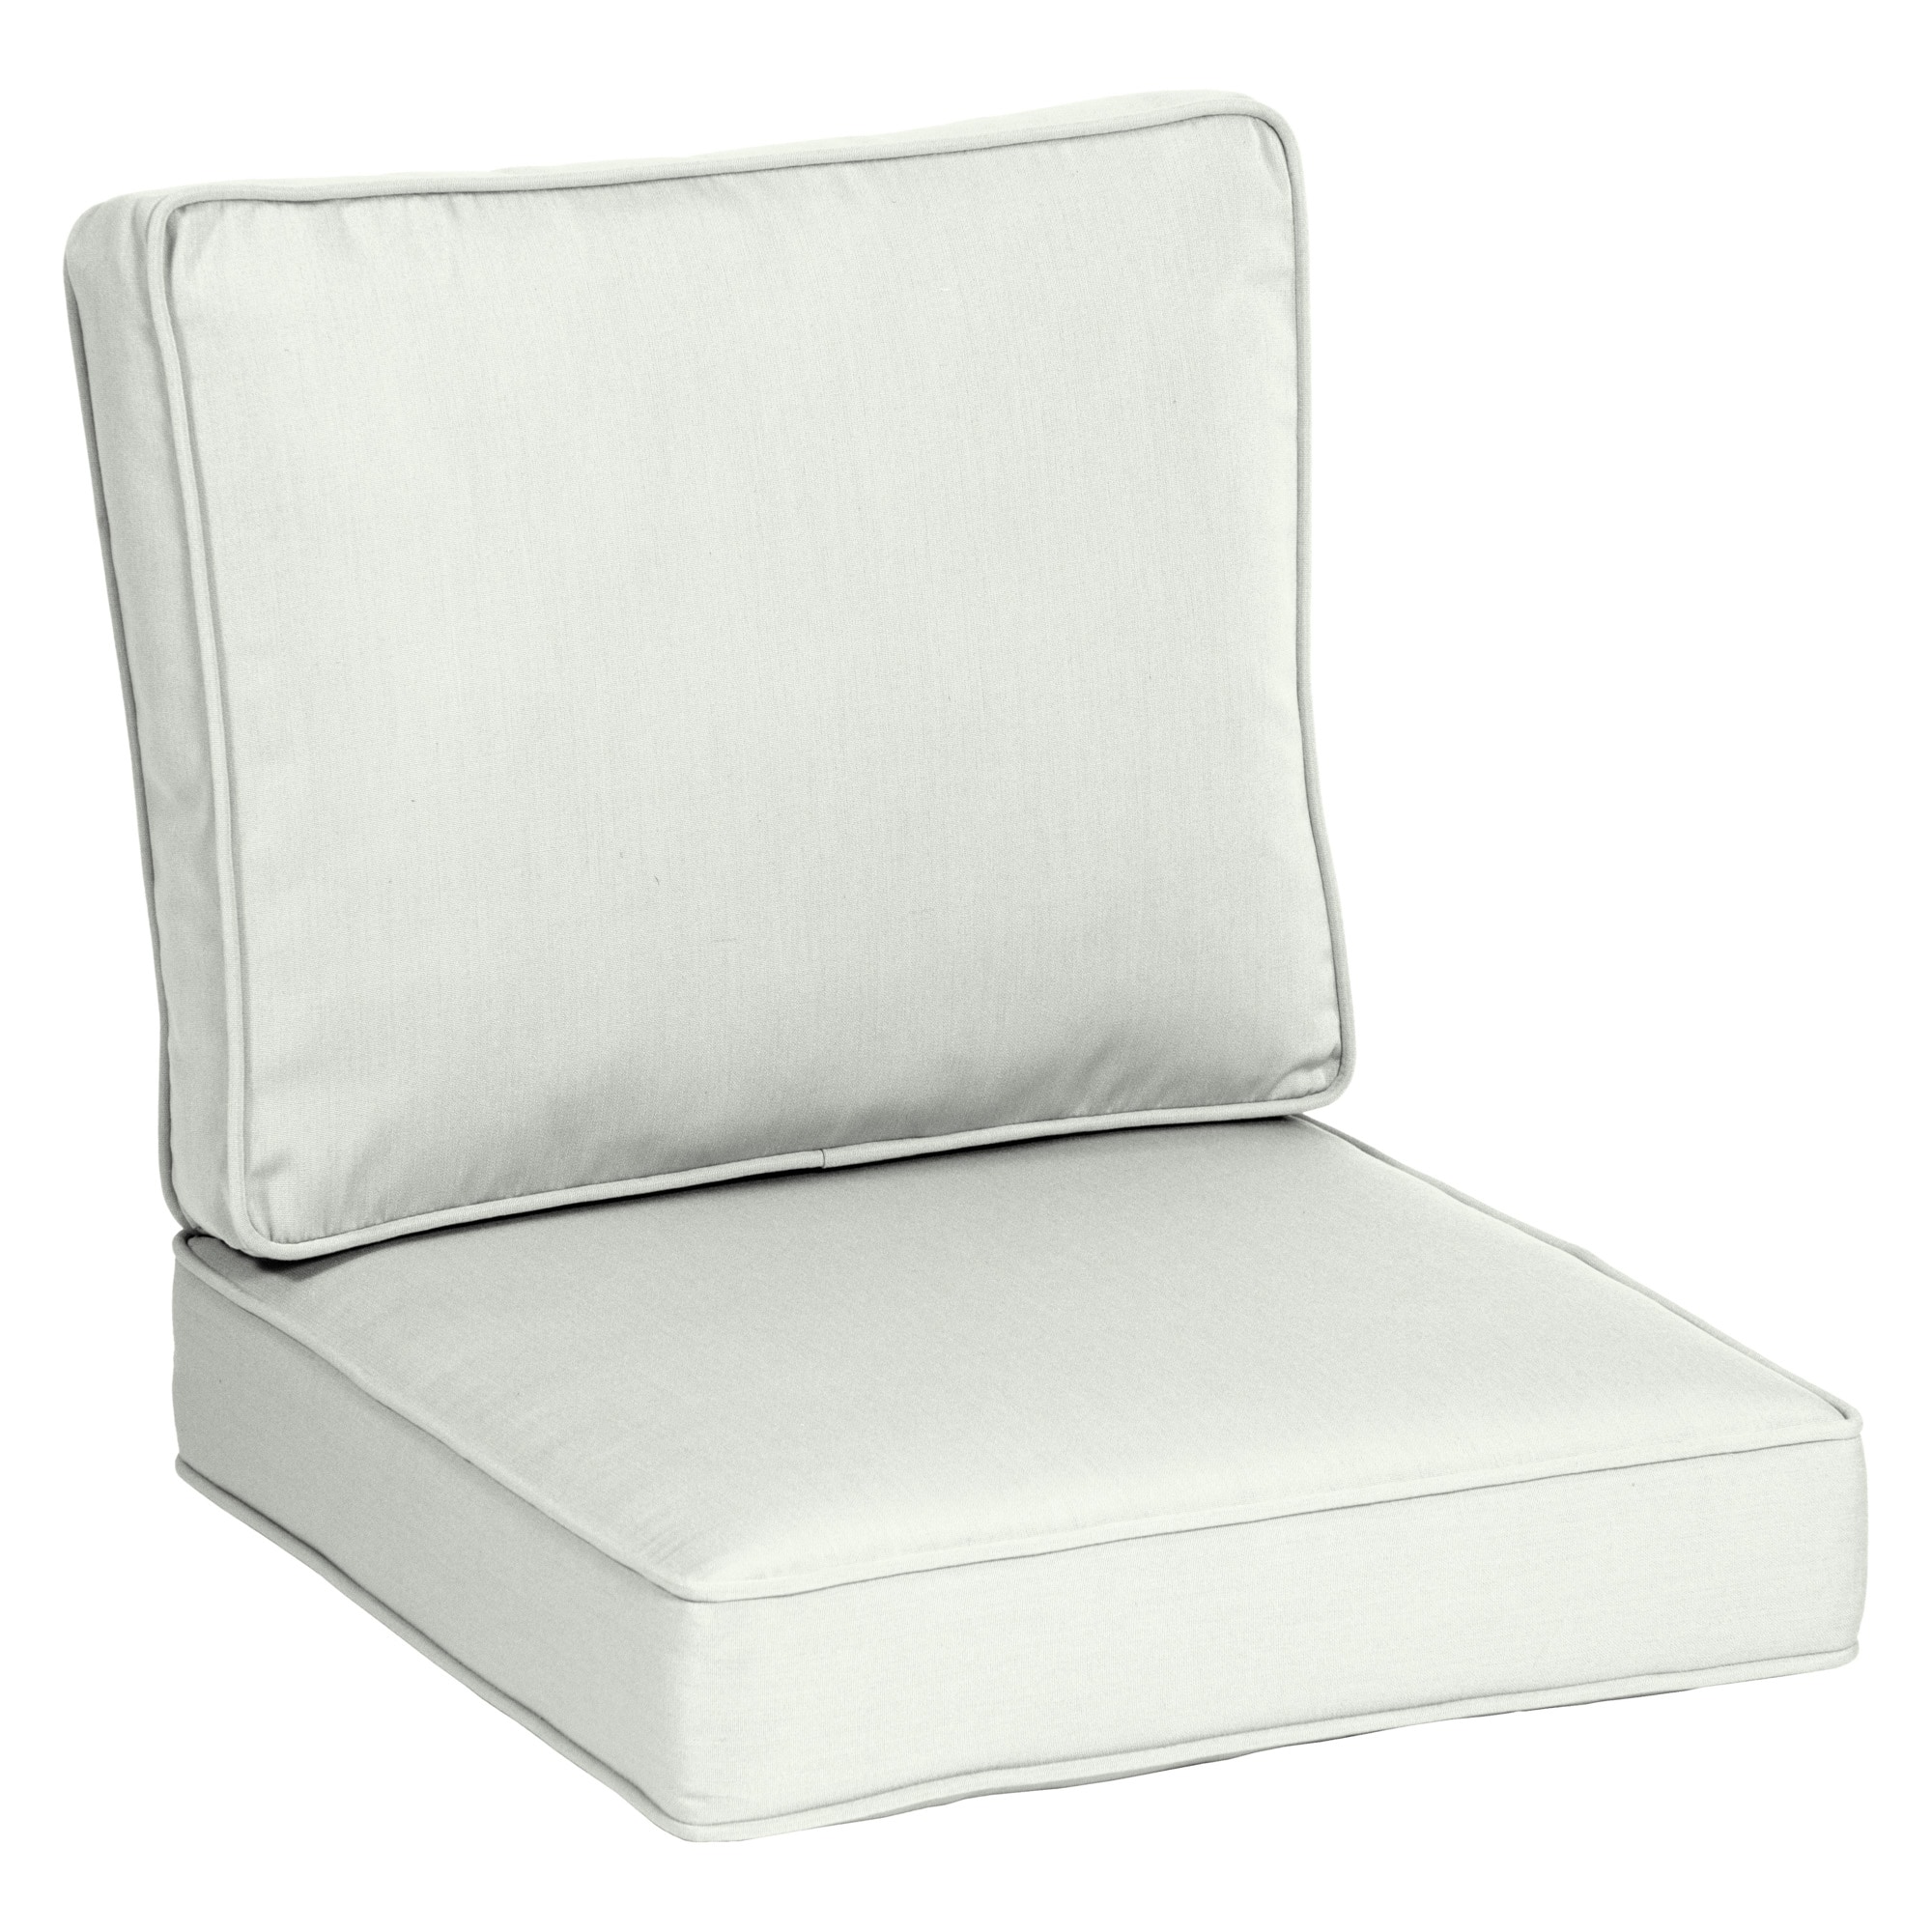 Arden Selections Oasis 19 x 19 in. Outdoor Seat Cushion - Cloud White